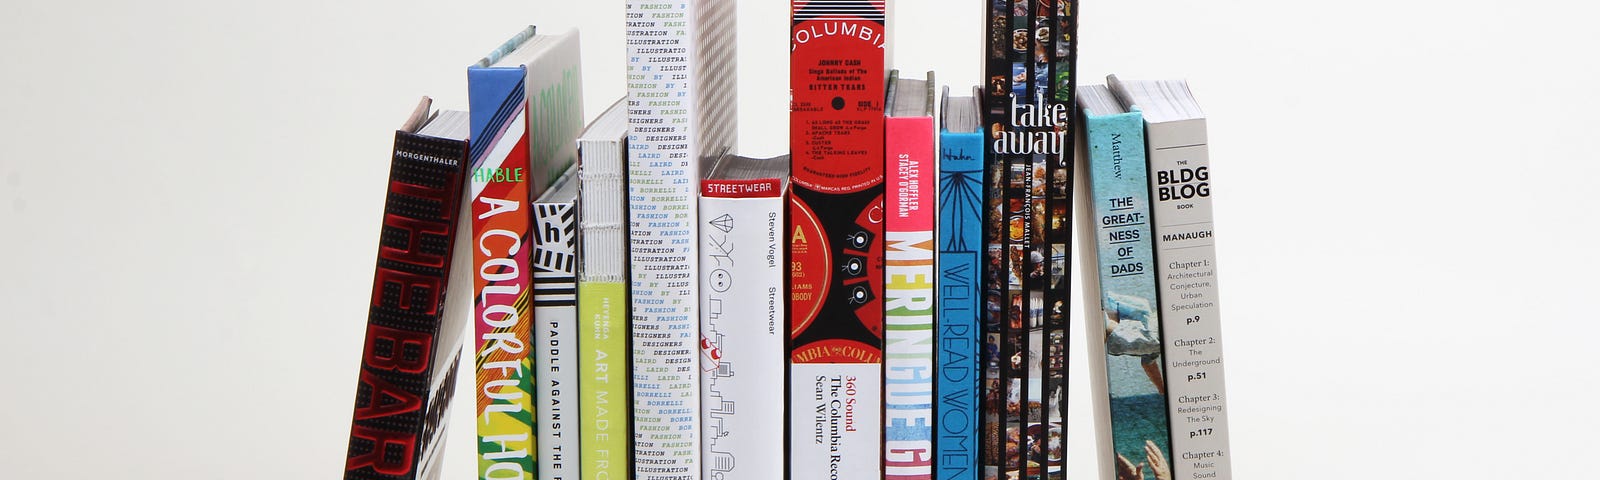 The Overlooked Art of Designing a Book Spine